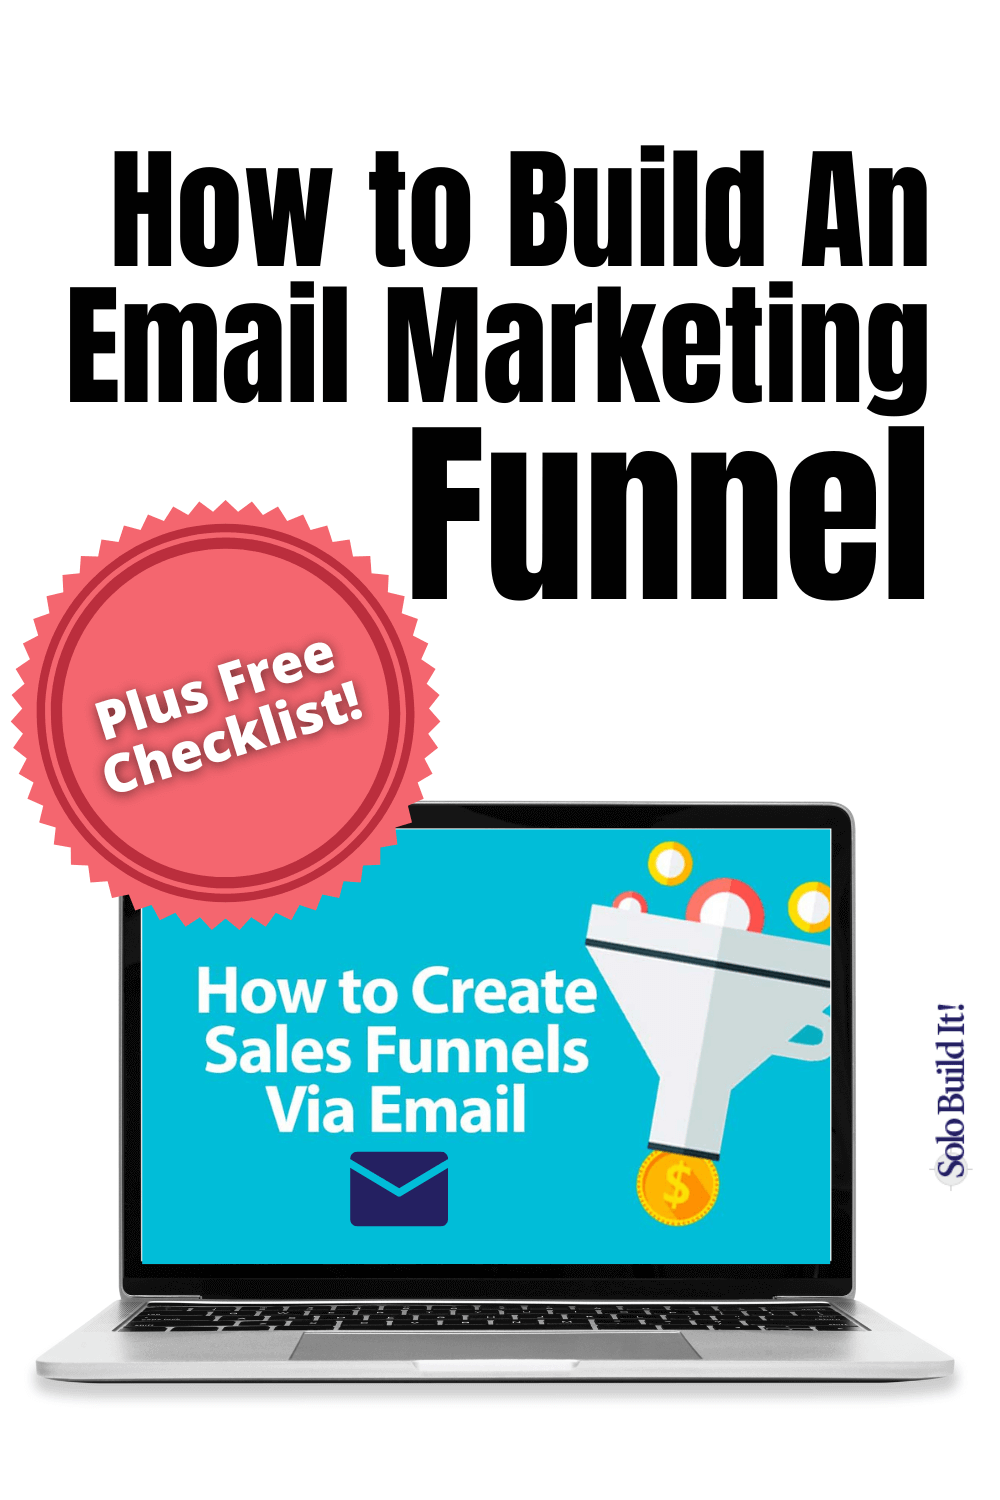 Email Marketing Funnel: How to Create Sales Funnels Via Email